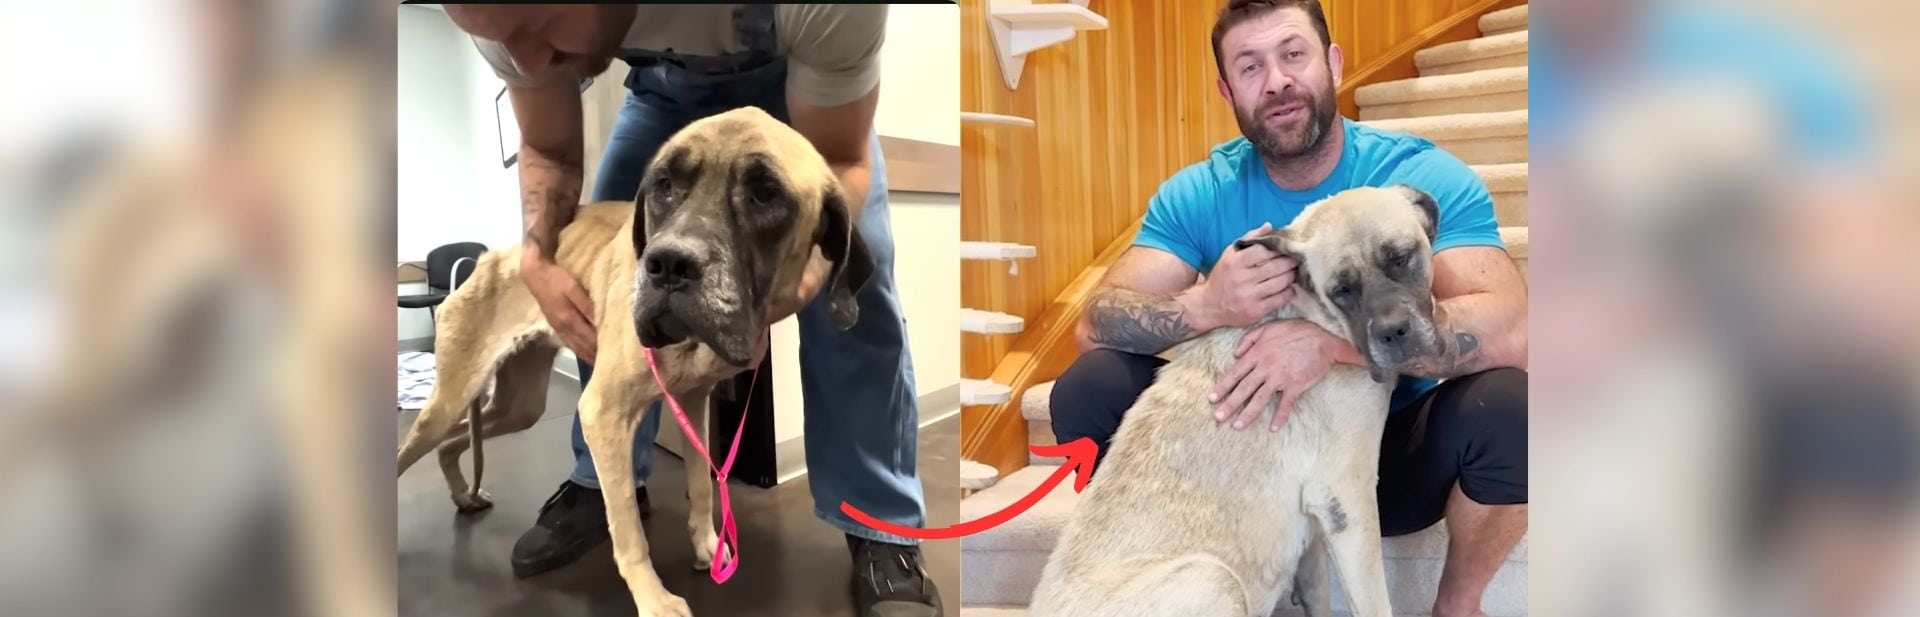 Barely Able to Stand, This Neglected Mastiff Finds Love That Changes Everything